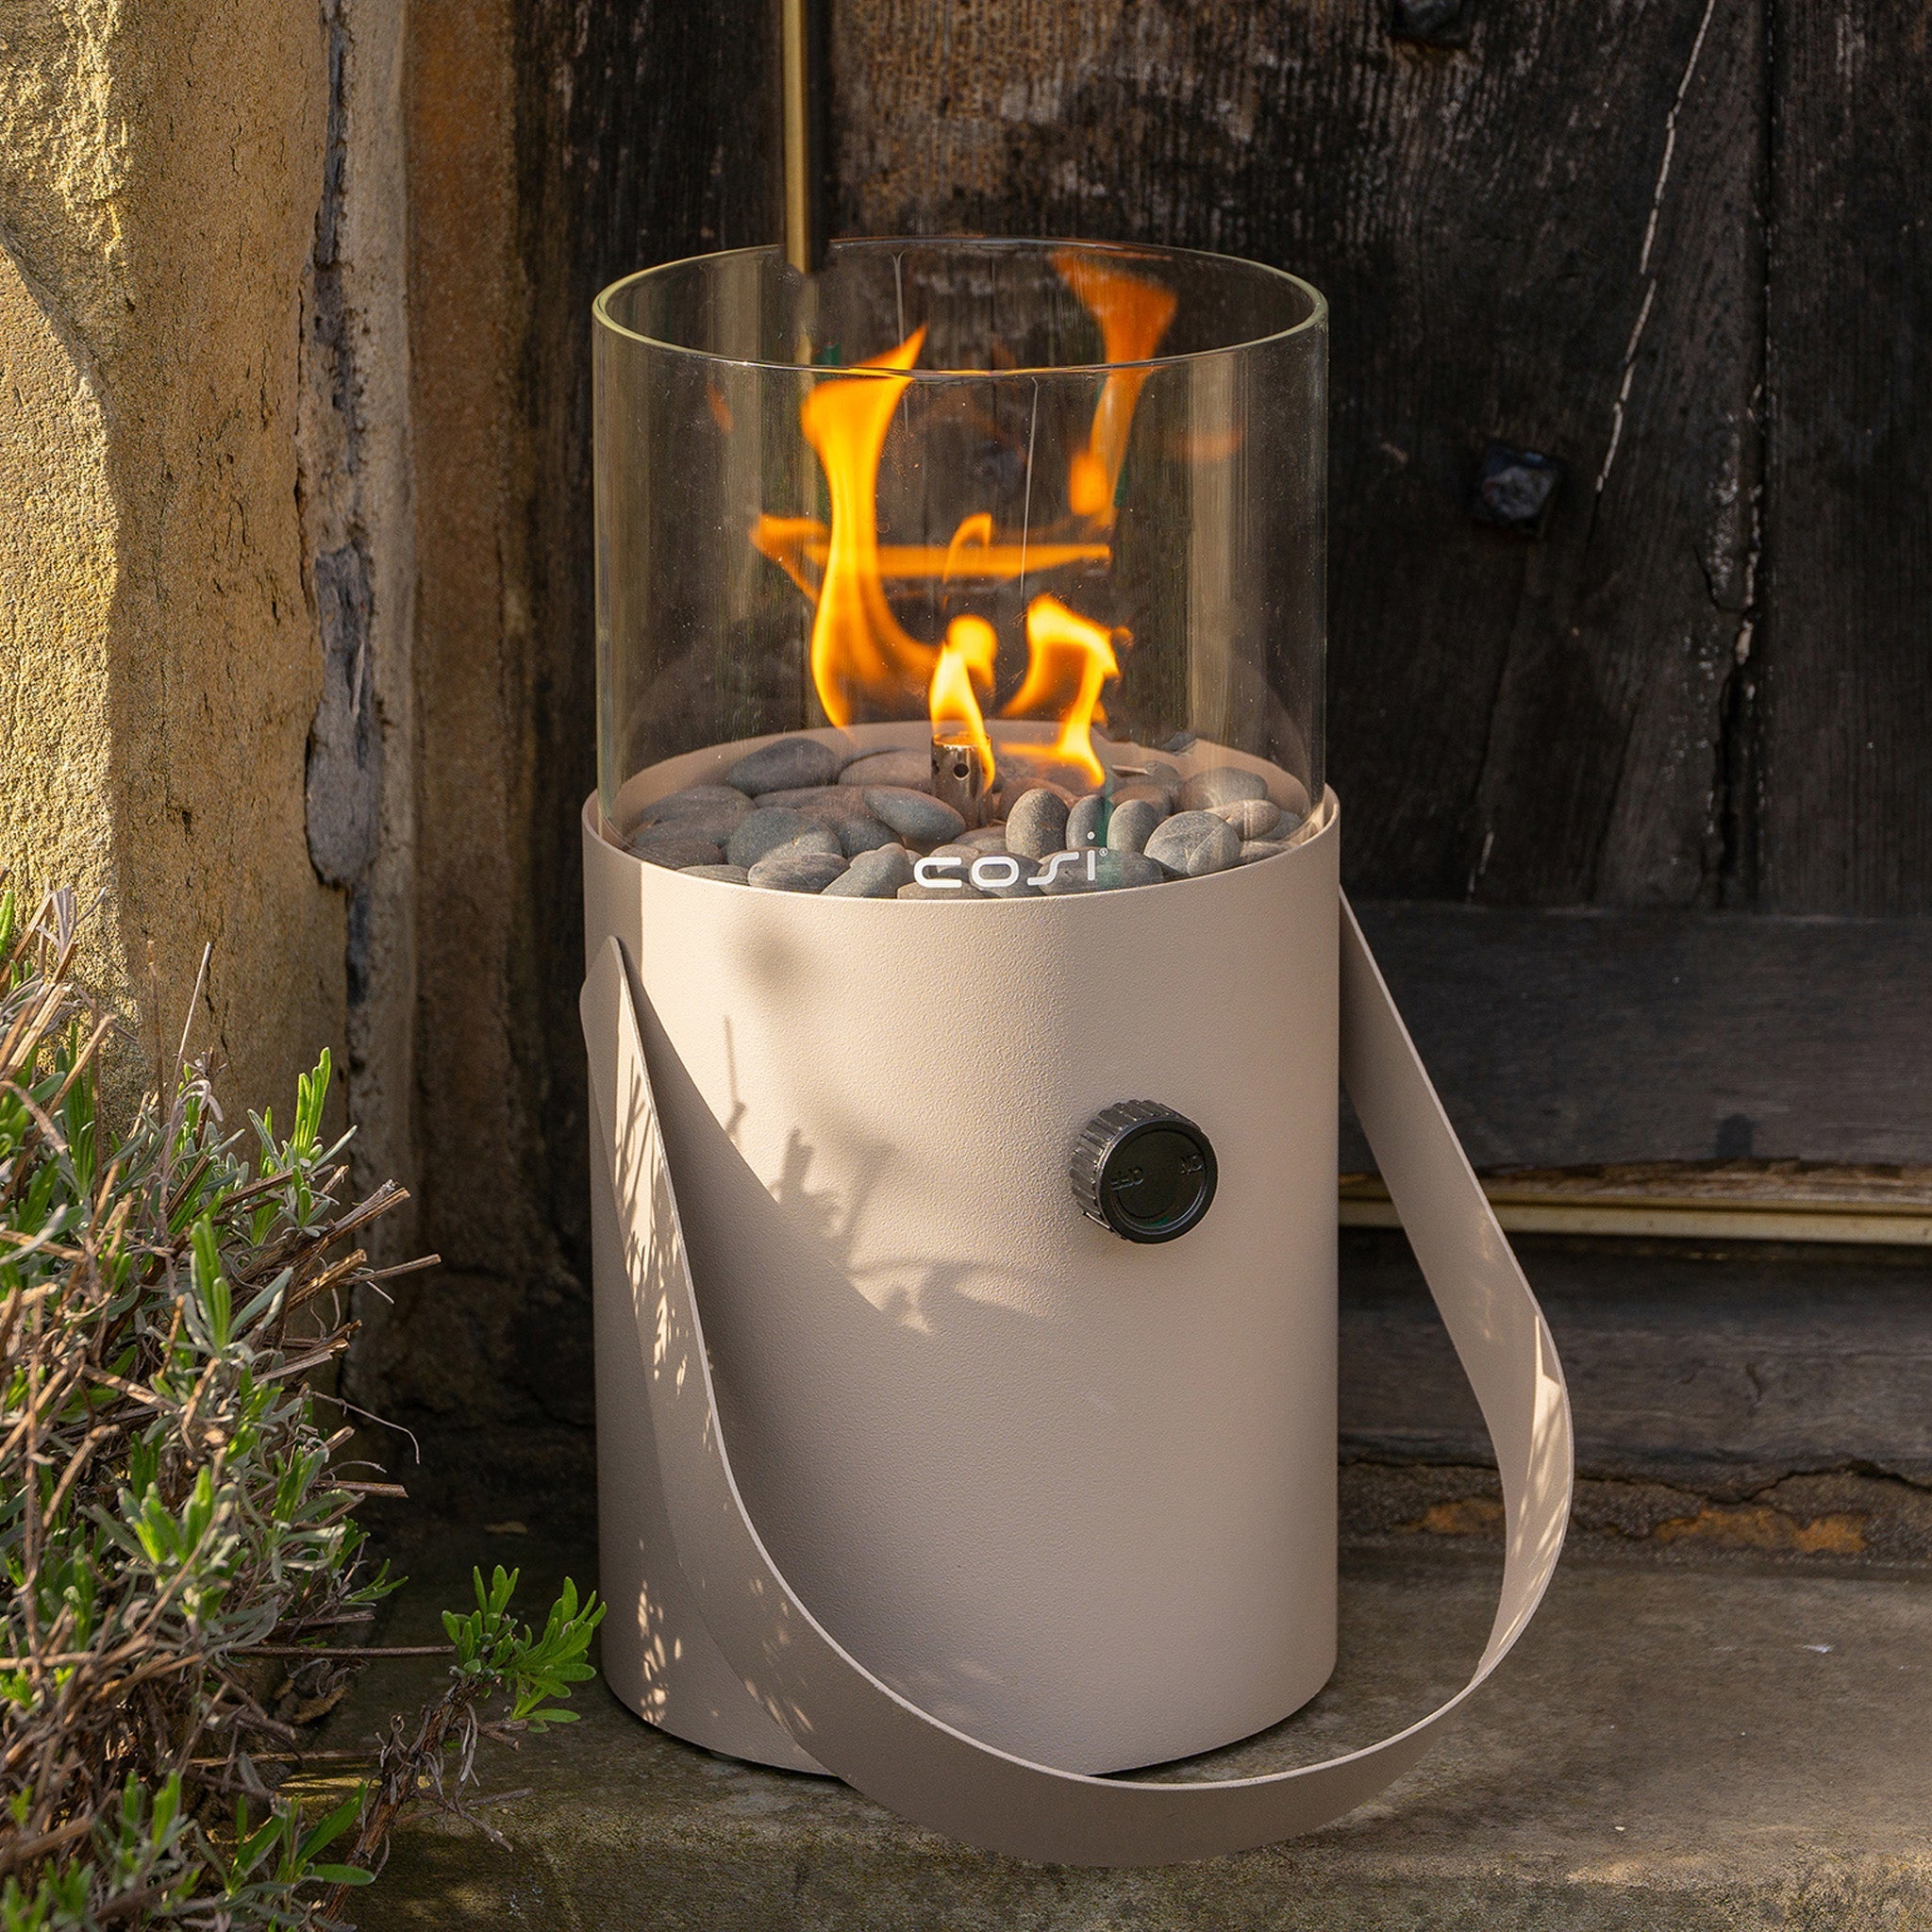 Cosiscoop Fire Lantern in Taupe